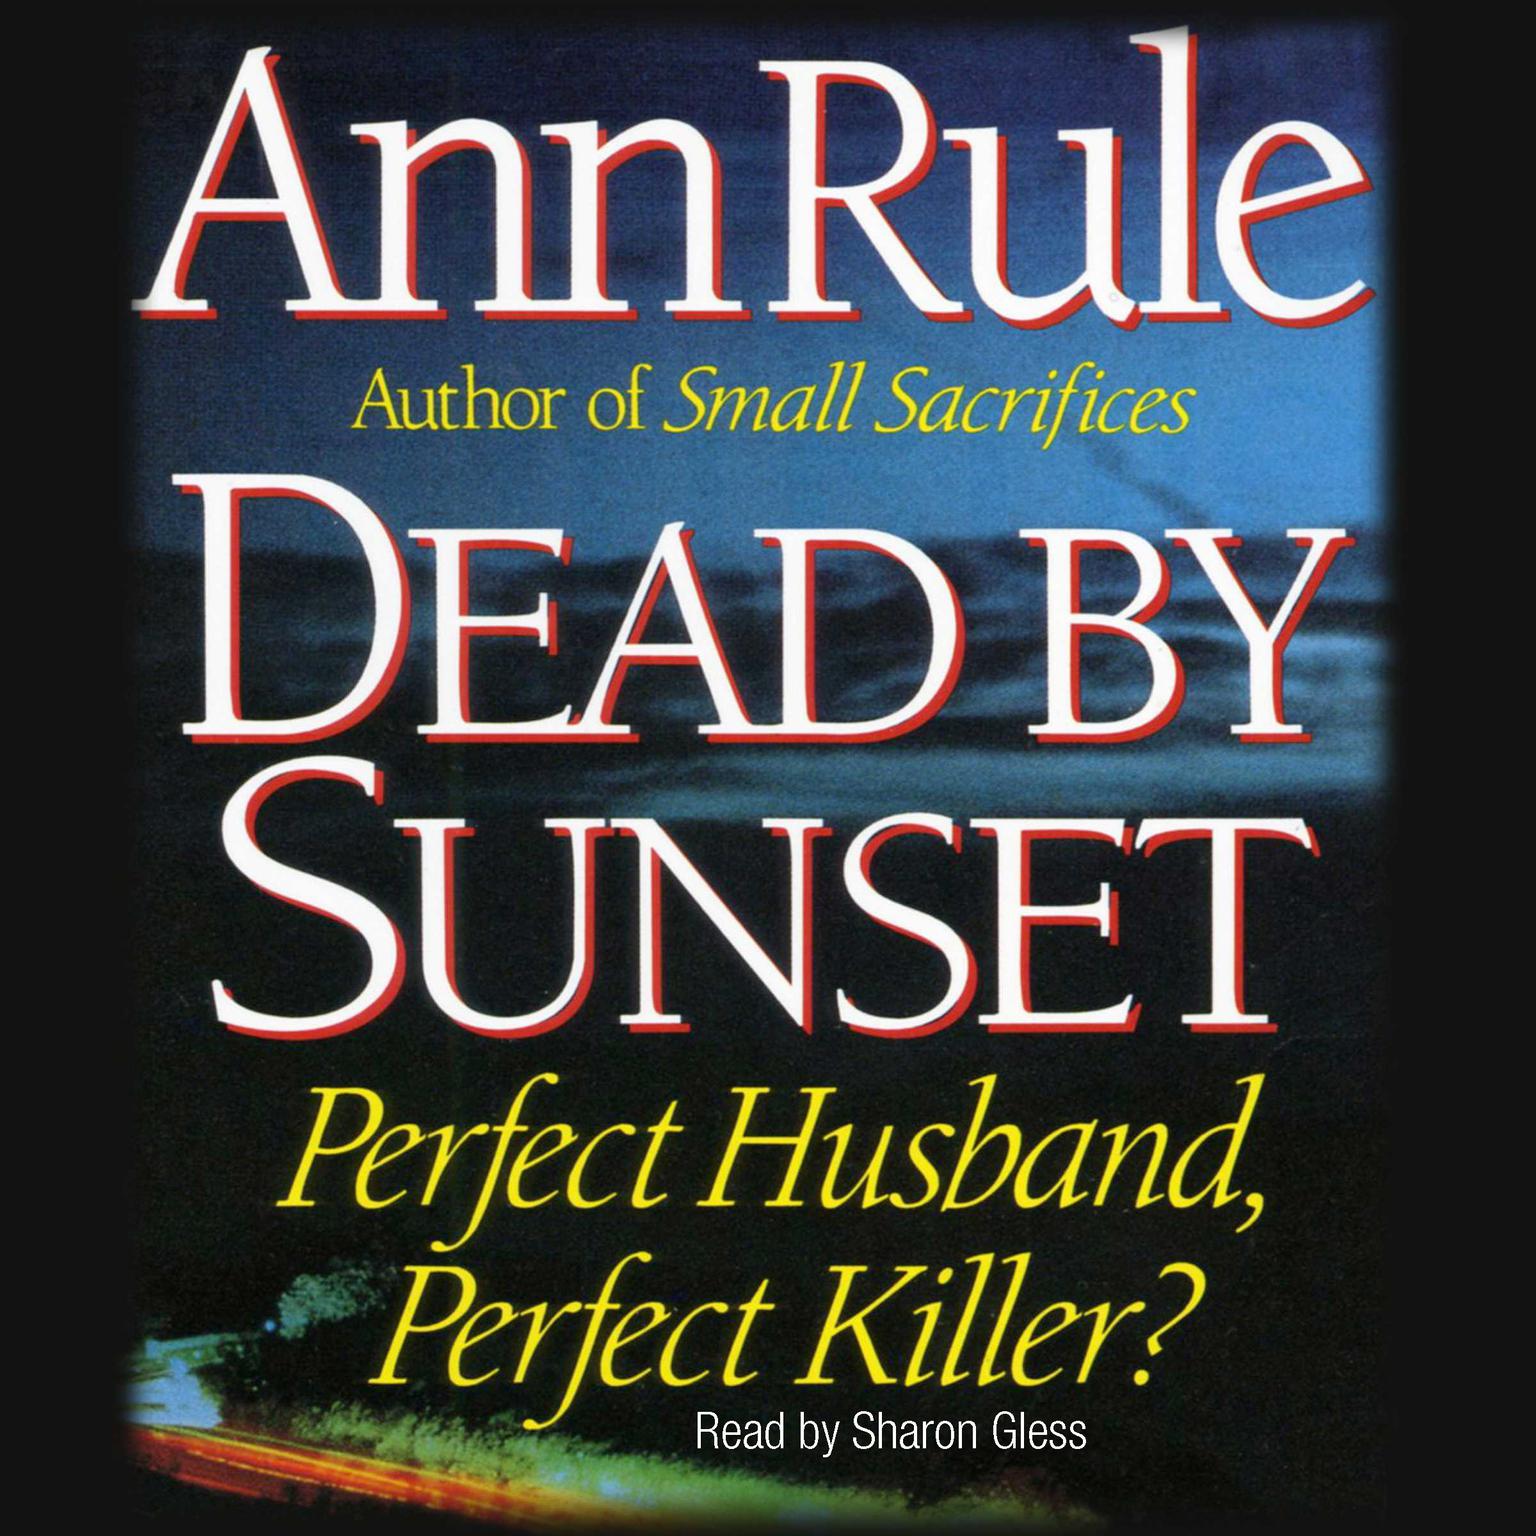 Dead by Sunset (Abridged): Perfect Husband, Perfect Killer? Audiobook, by Ann Rule